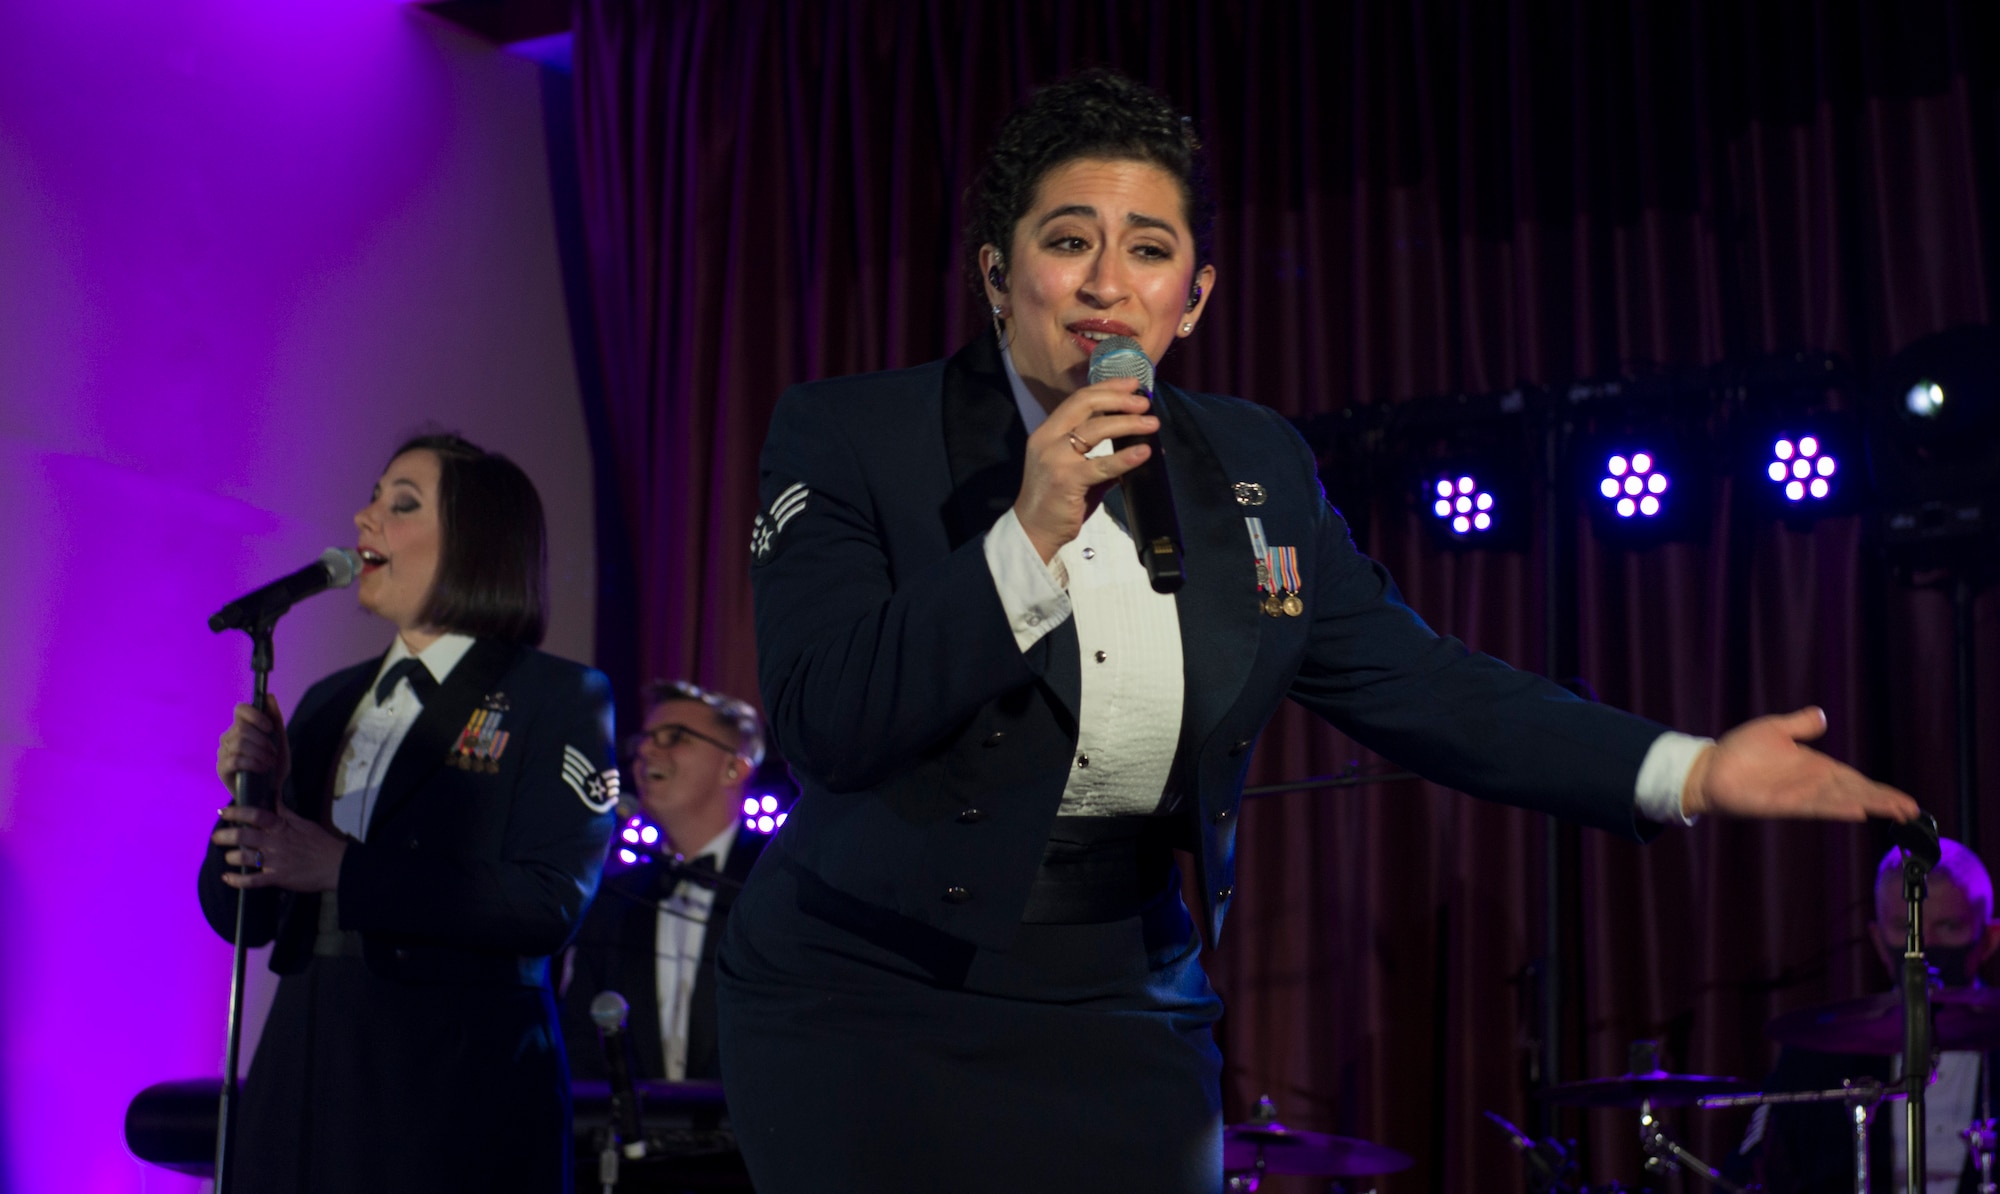 Senior Airman Alycia Cancel, U.S. Air Force Band of the Pacific vocalist, sings during the Sounds of the Season show at the Officer’s Club on Yokota Air Base, Japan, Dec. 15, 2020. Cancel sang to a live and virtual audience to spread holiday joy. (U.S. Air Force photo by Staff Sgt. Joshua Edwards)